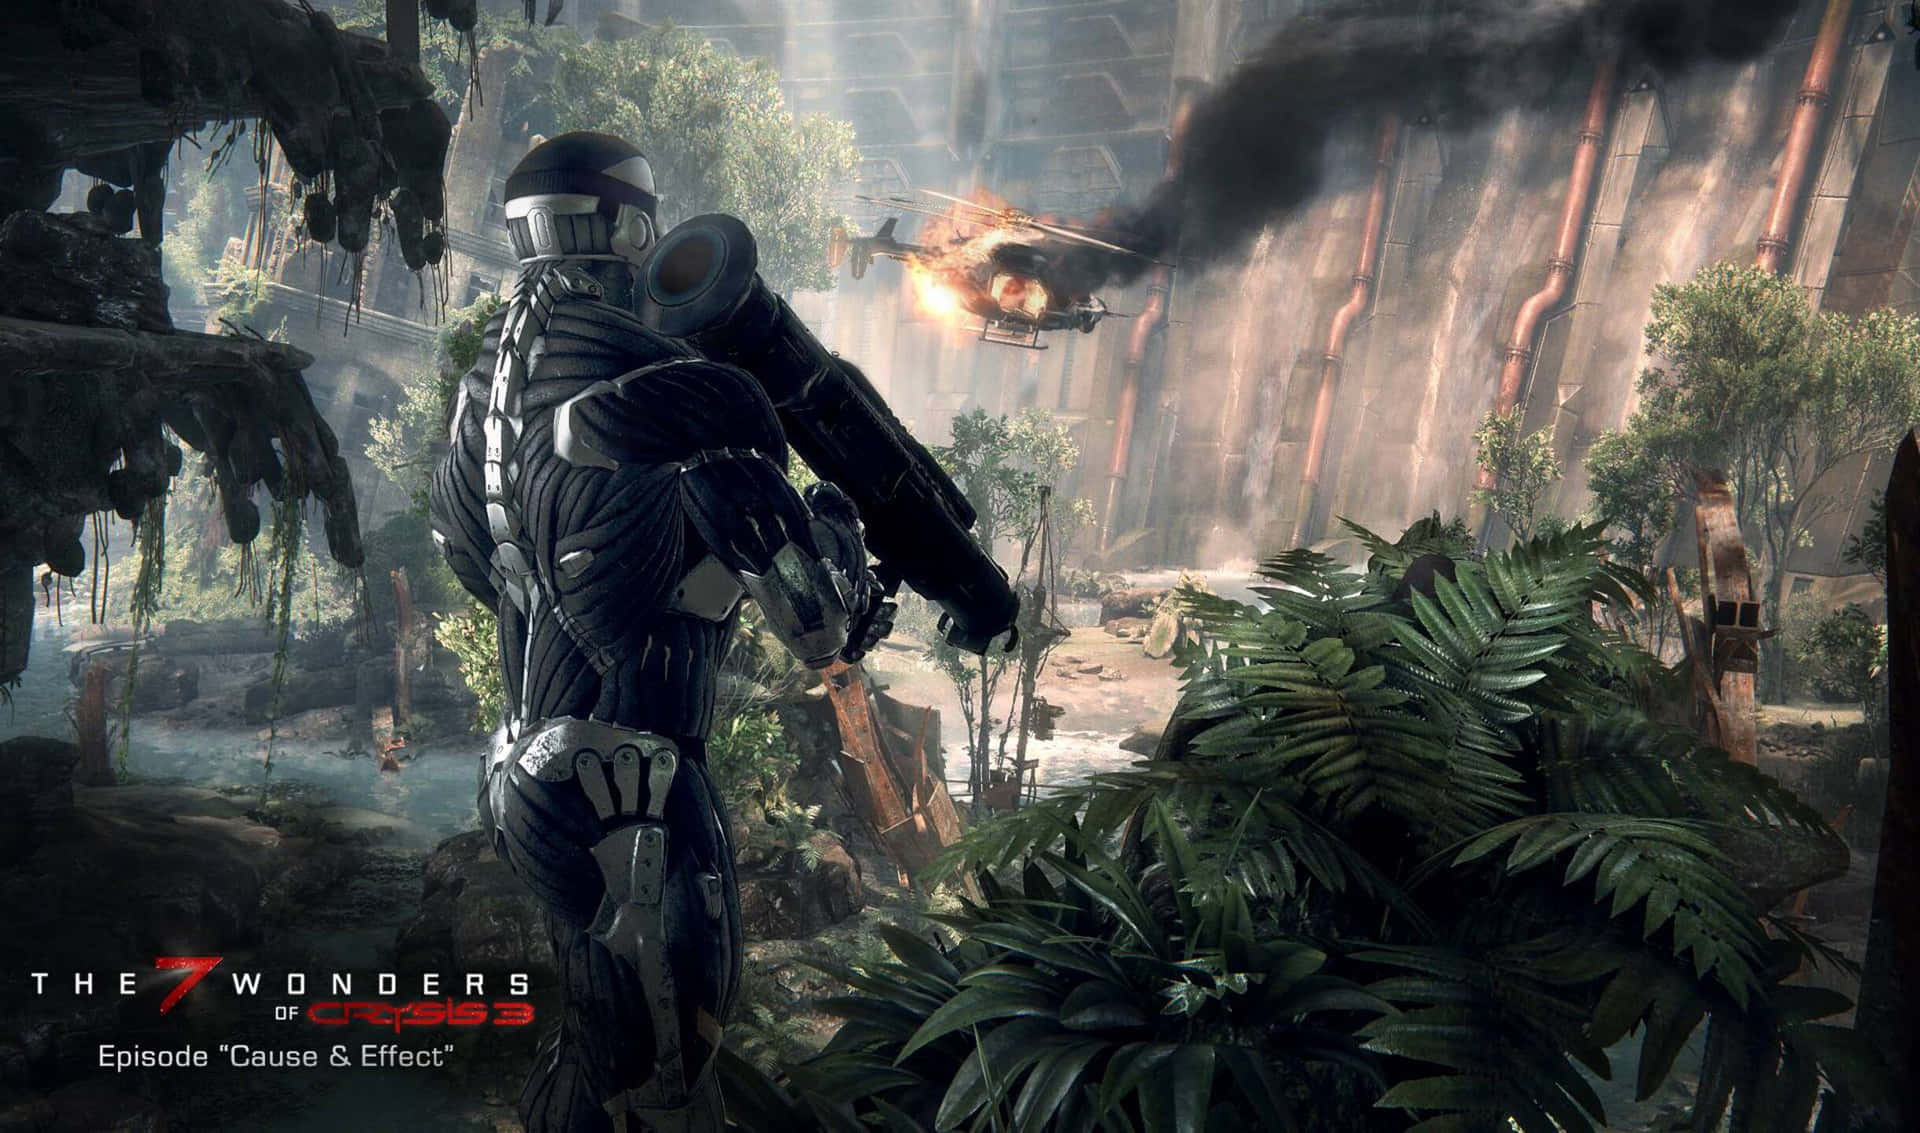 Immerse Yourself in a Fantasy Warzone with Crysis 3